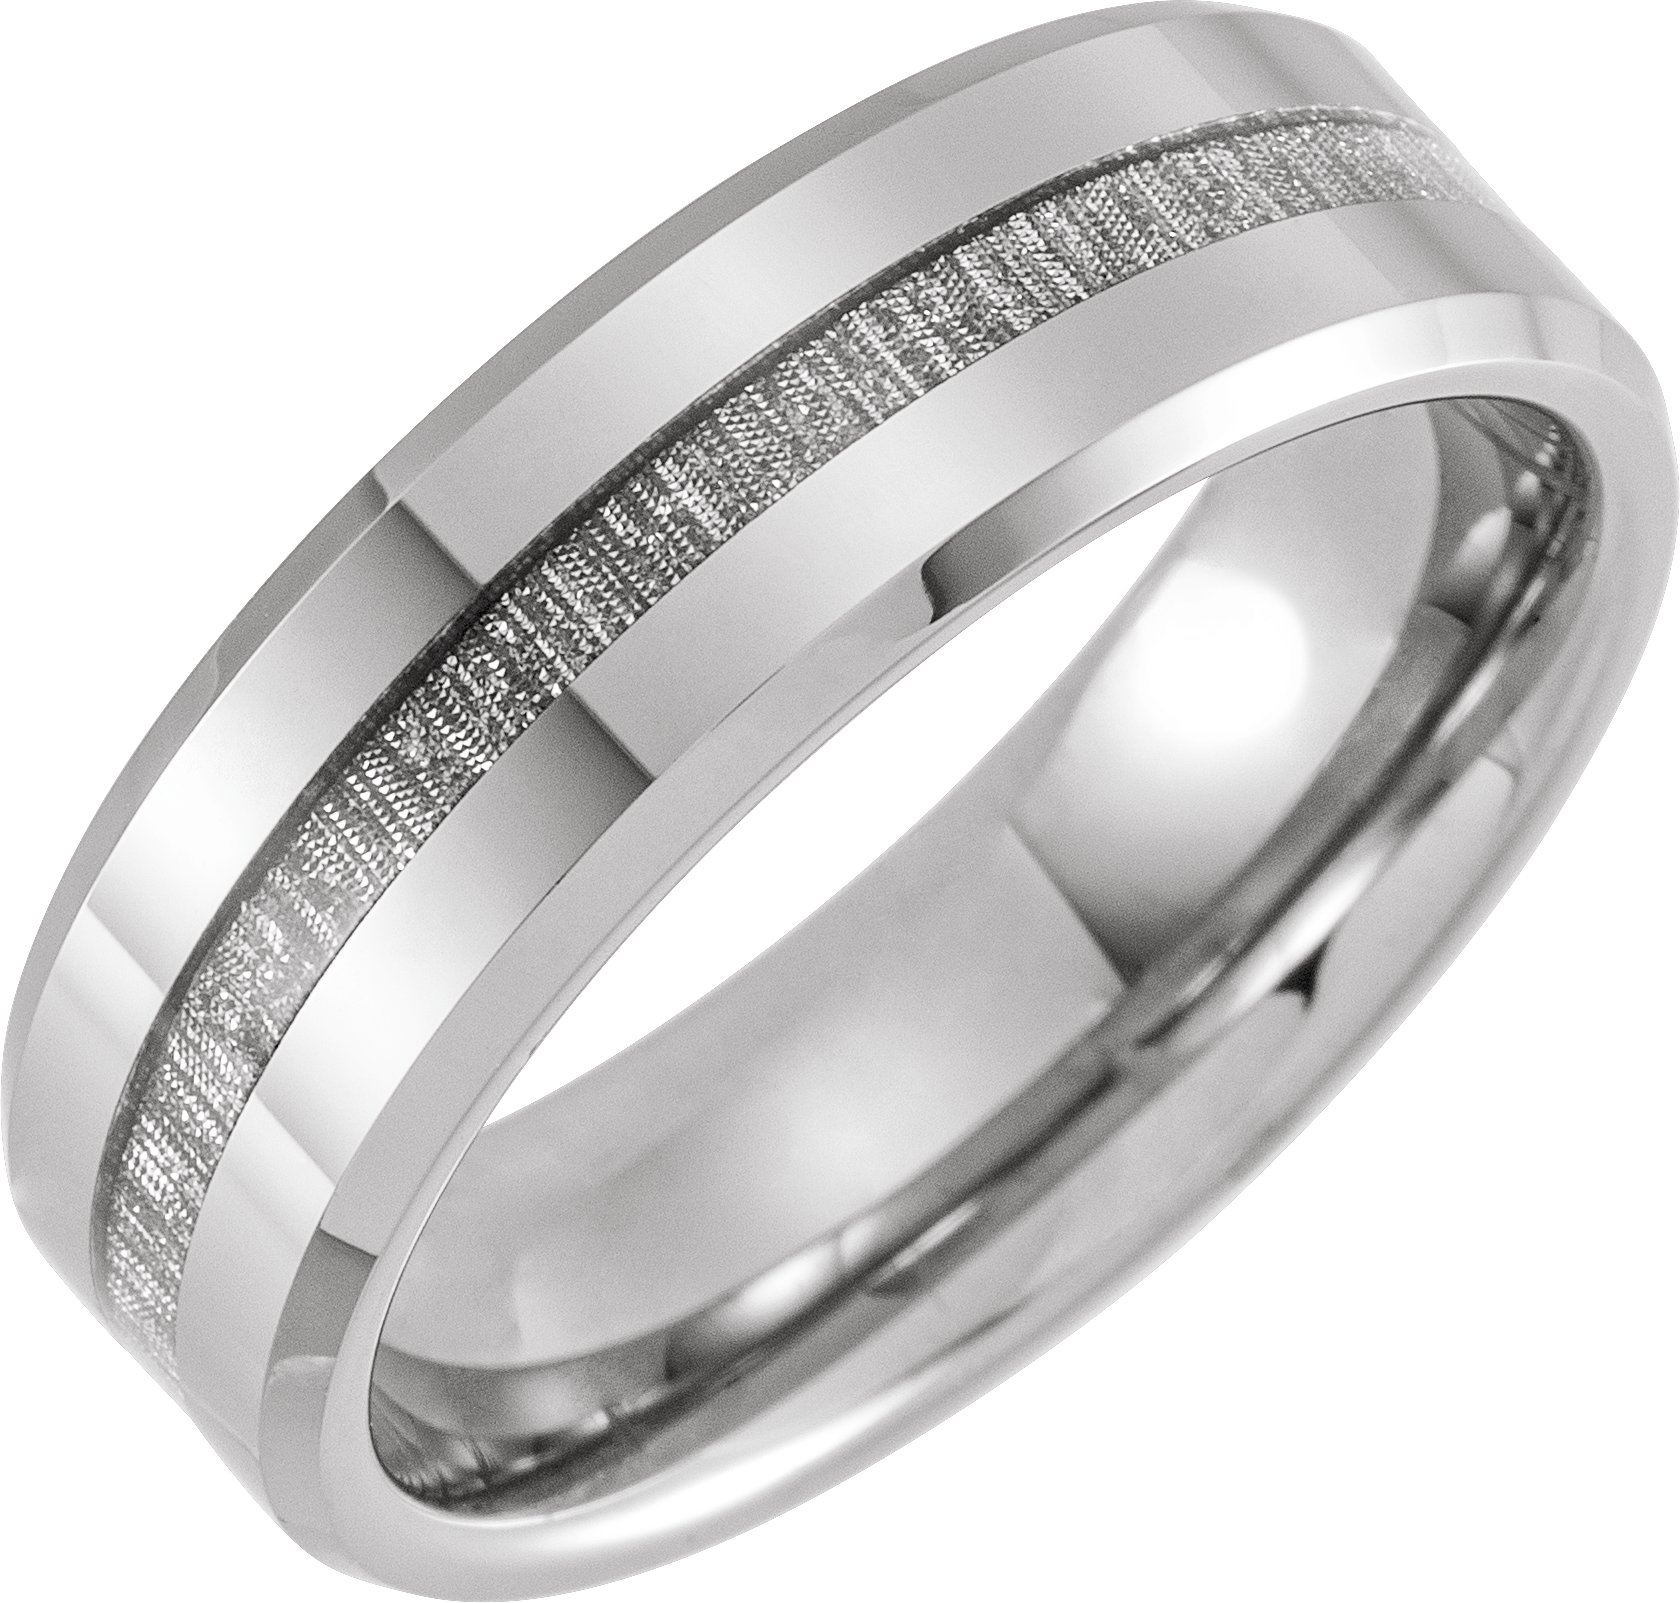 Tungsten 8 mm Beveled Band with Manmade Meteorite Inlay Size 12